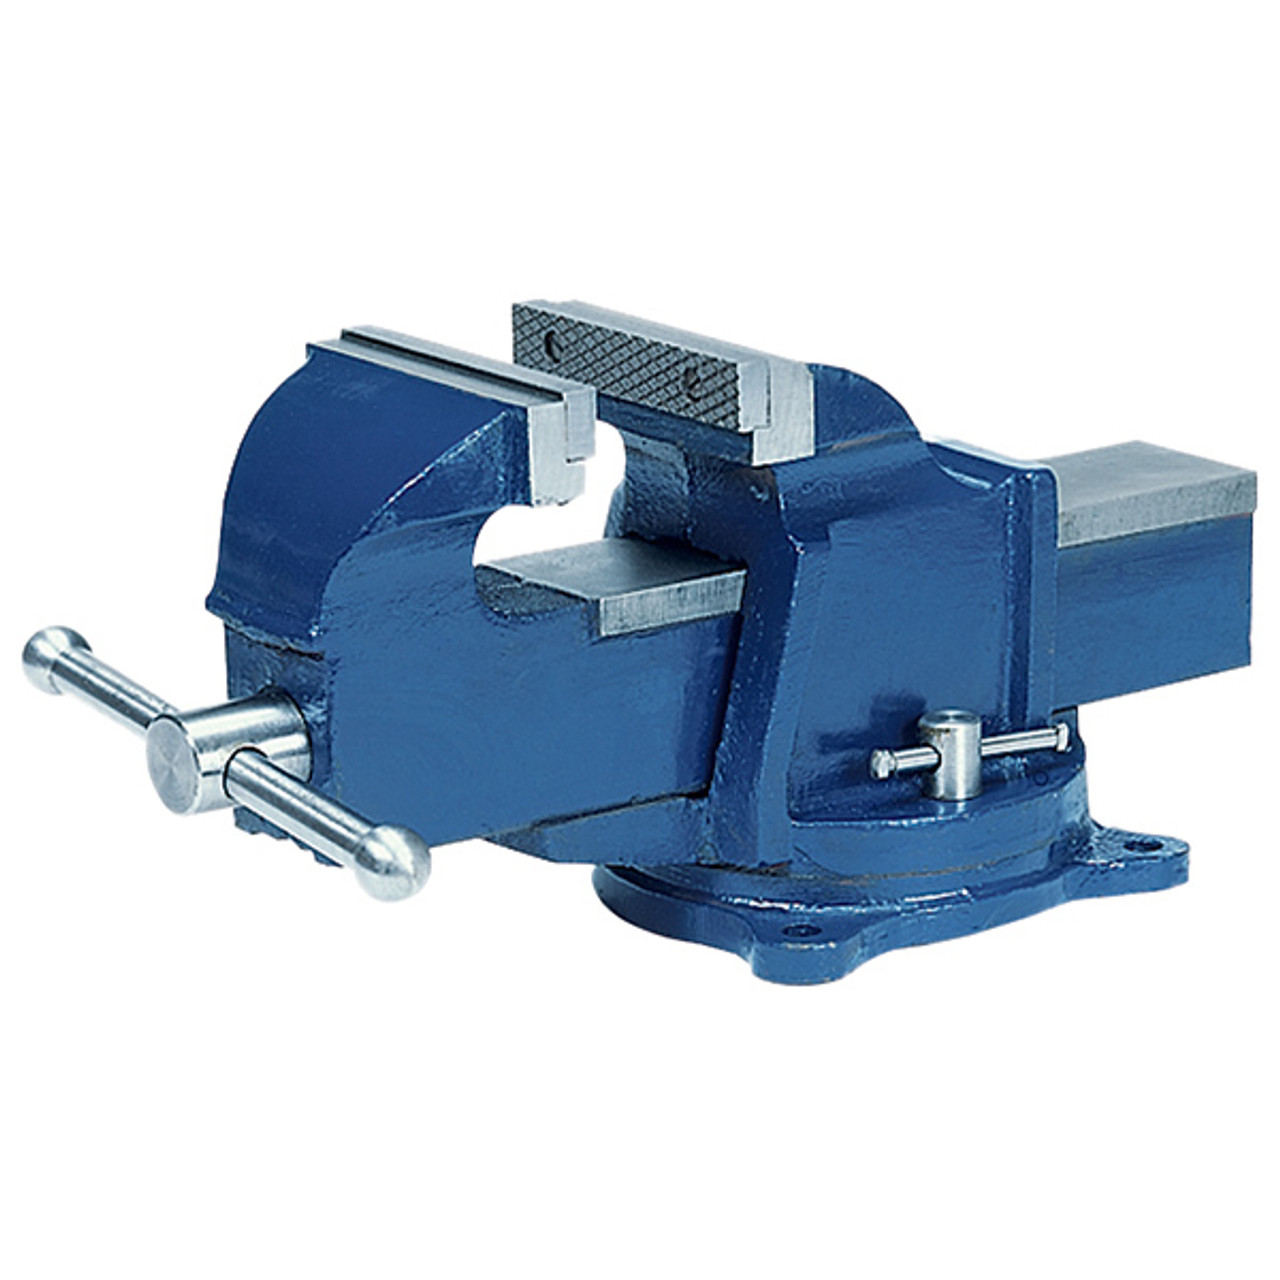 61-207-104      4" INDUSTRIAL QUALITYSWIVEL BASE BENCH VISE